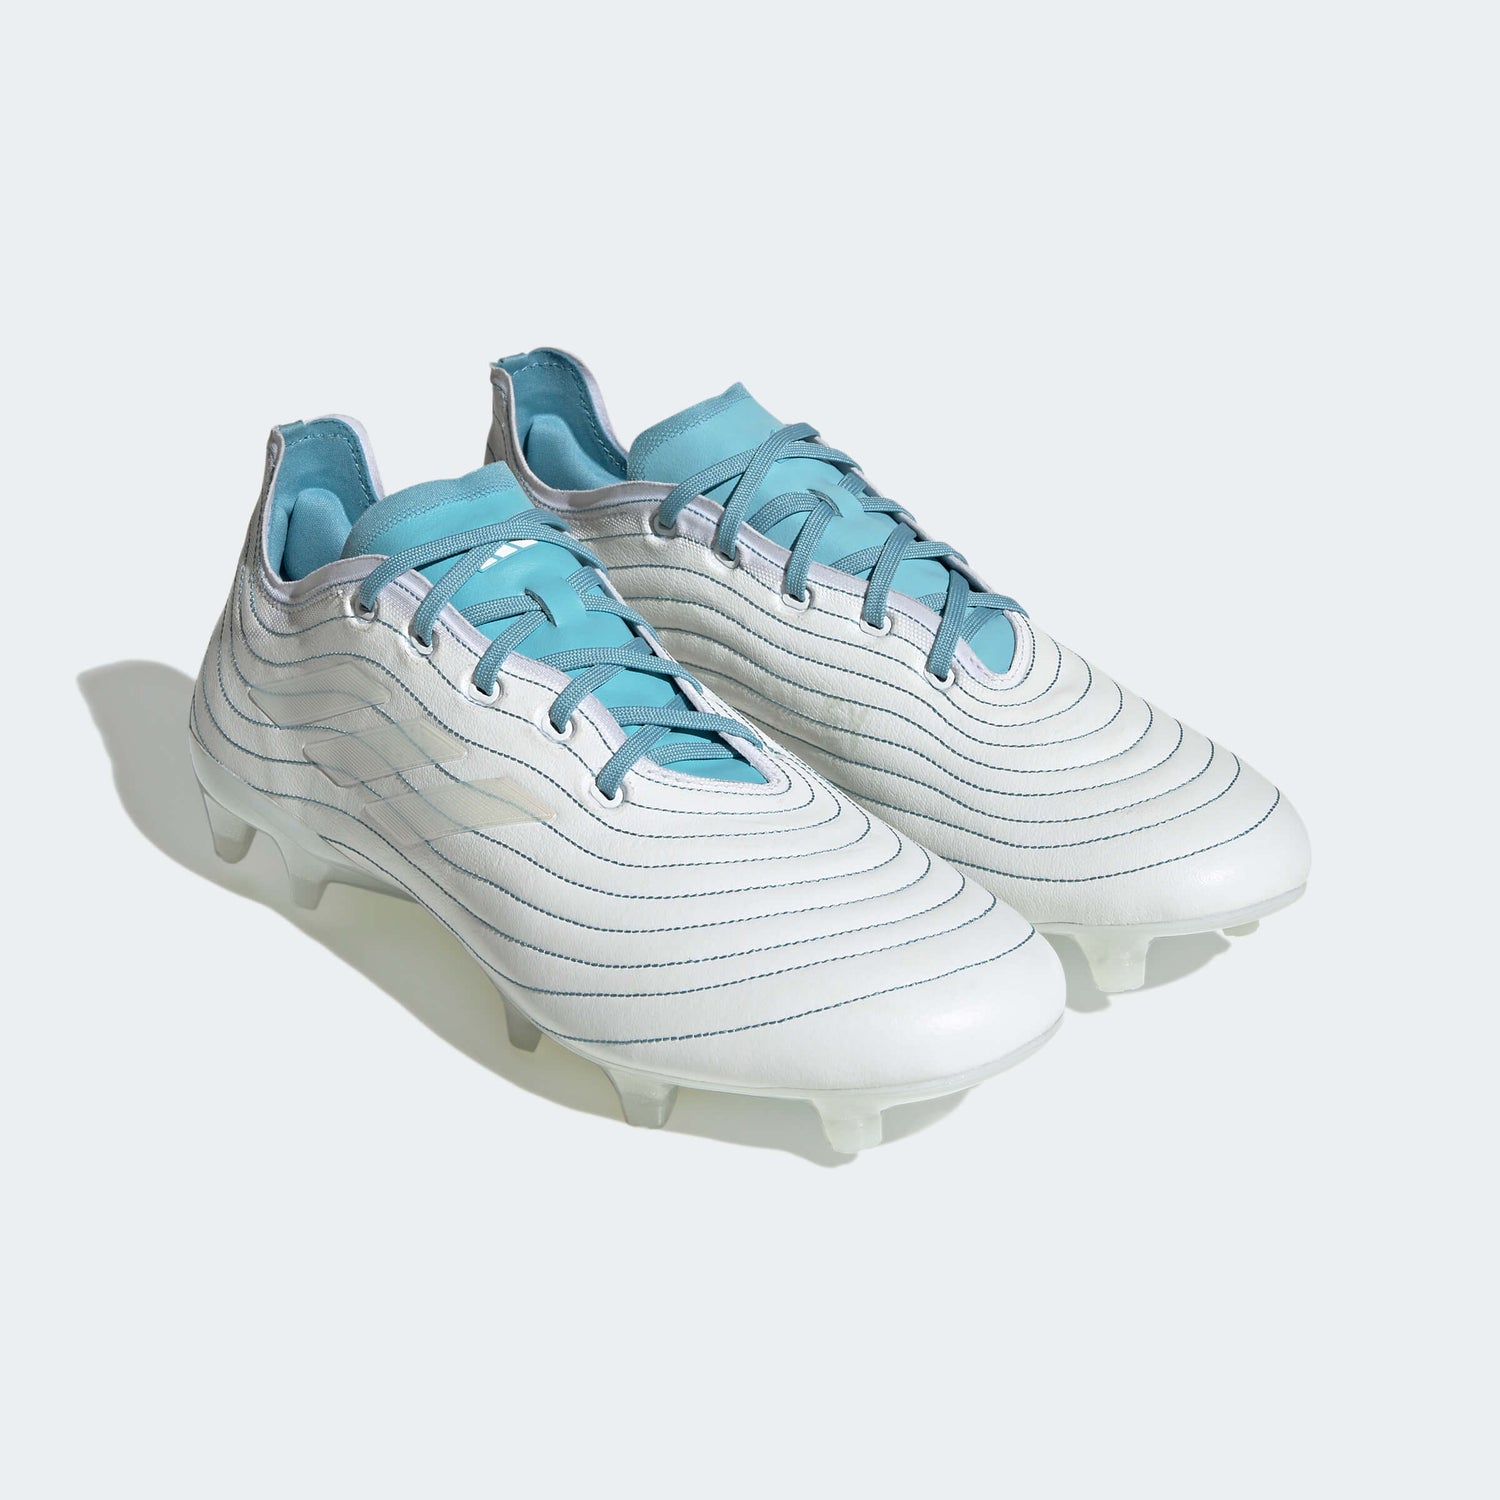 adidas Copa Pure .1 FG - Parley Pack (SP23) (Pair - Front Lateral)